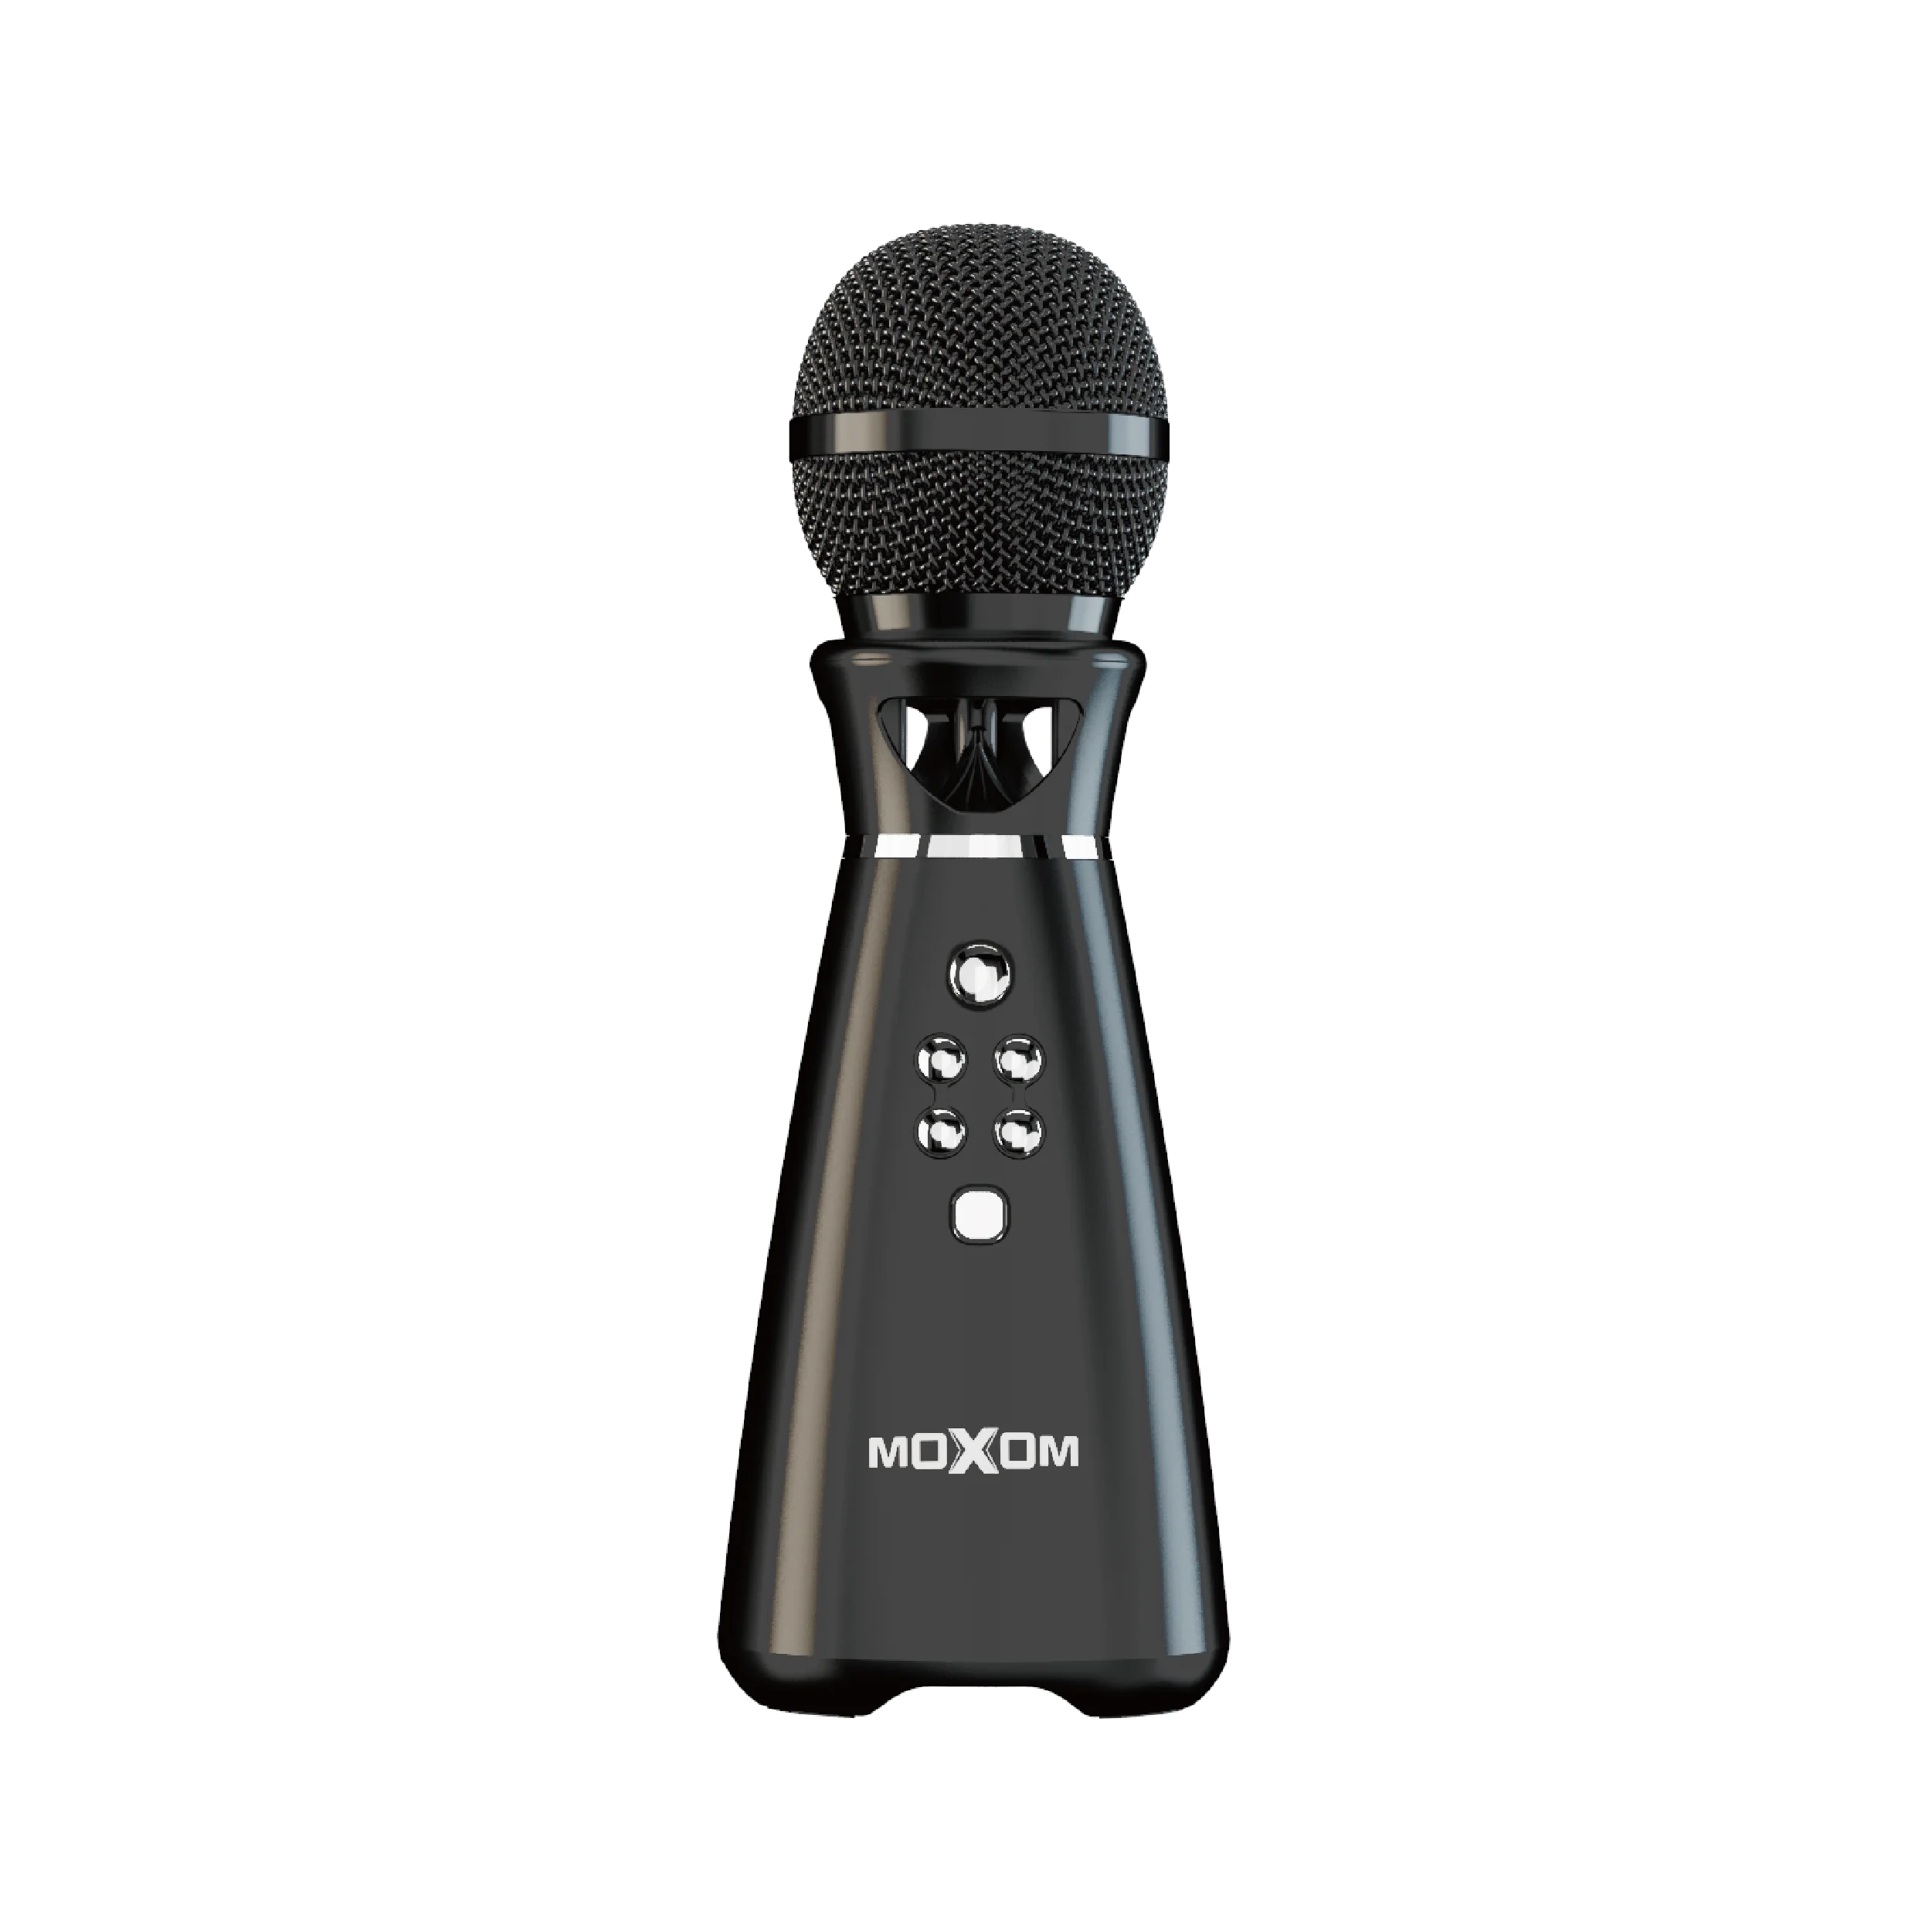 

MOXOM Wireless Condenser Microphone Professional Portable Karaoke Handheld Microphone with Speaker LED Lights